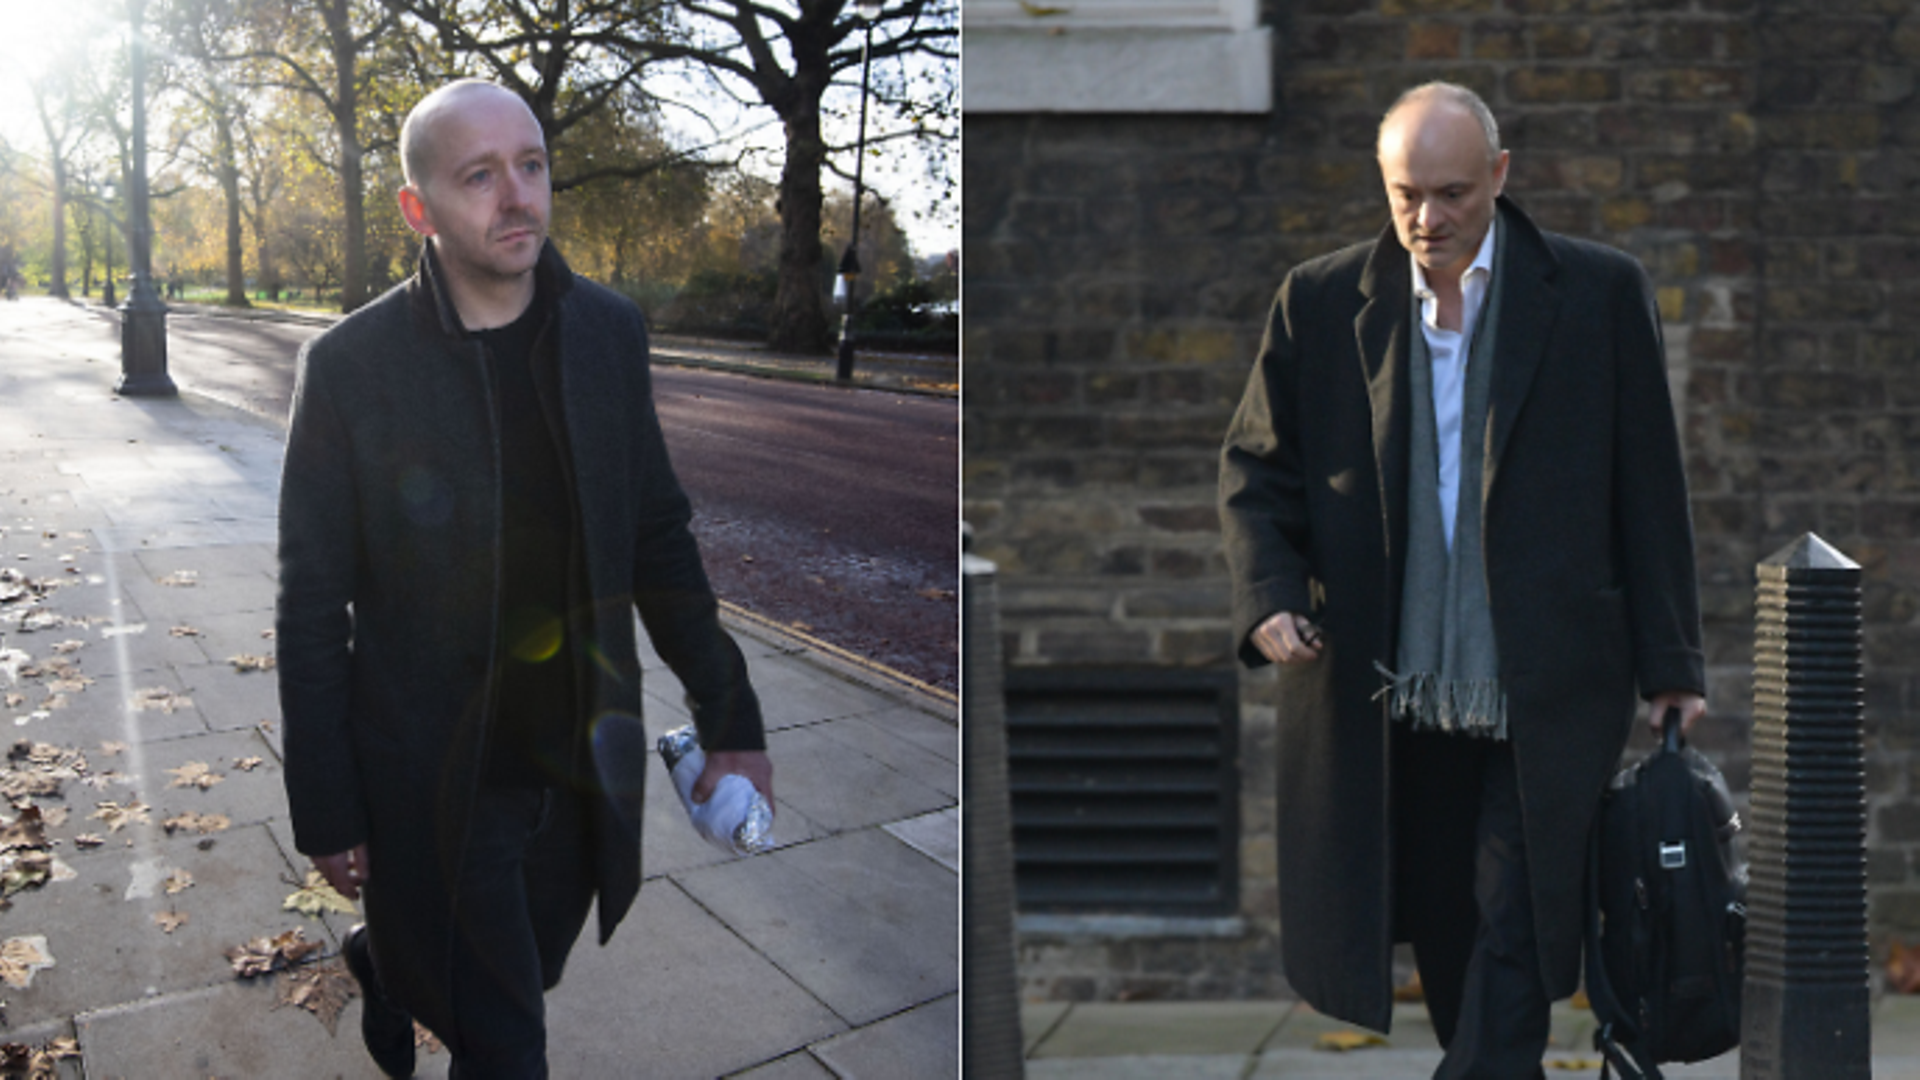 Lee Cain, the former director of communications at Number 10 (left) and Dominic Cummings, Boris Johnson's senior aide (right). - Credit: PA